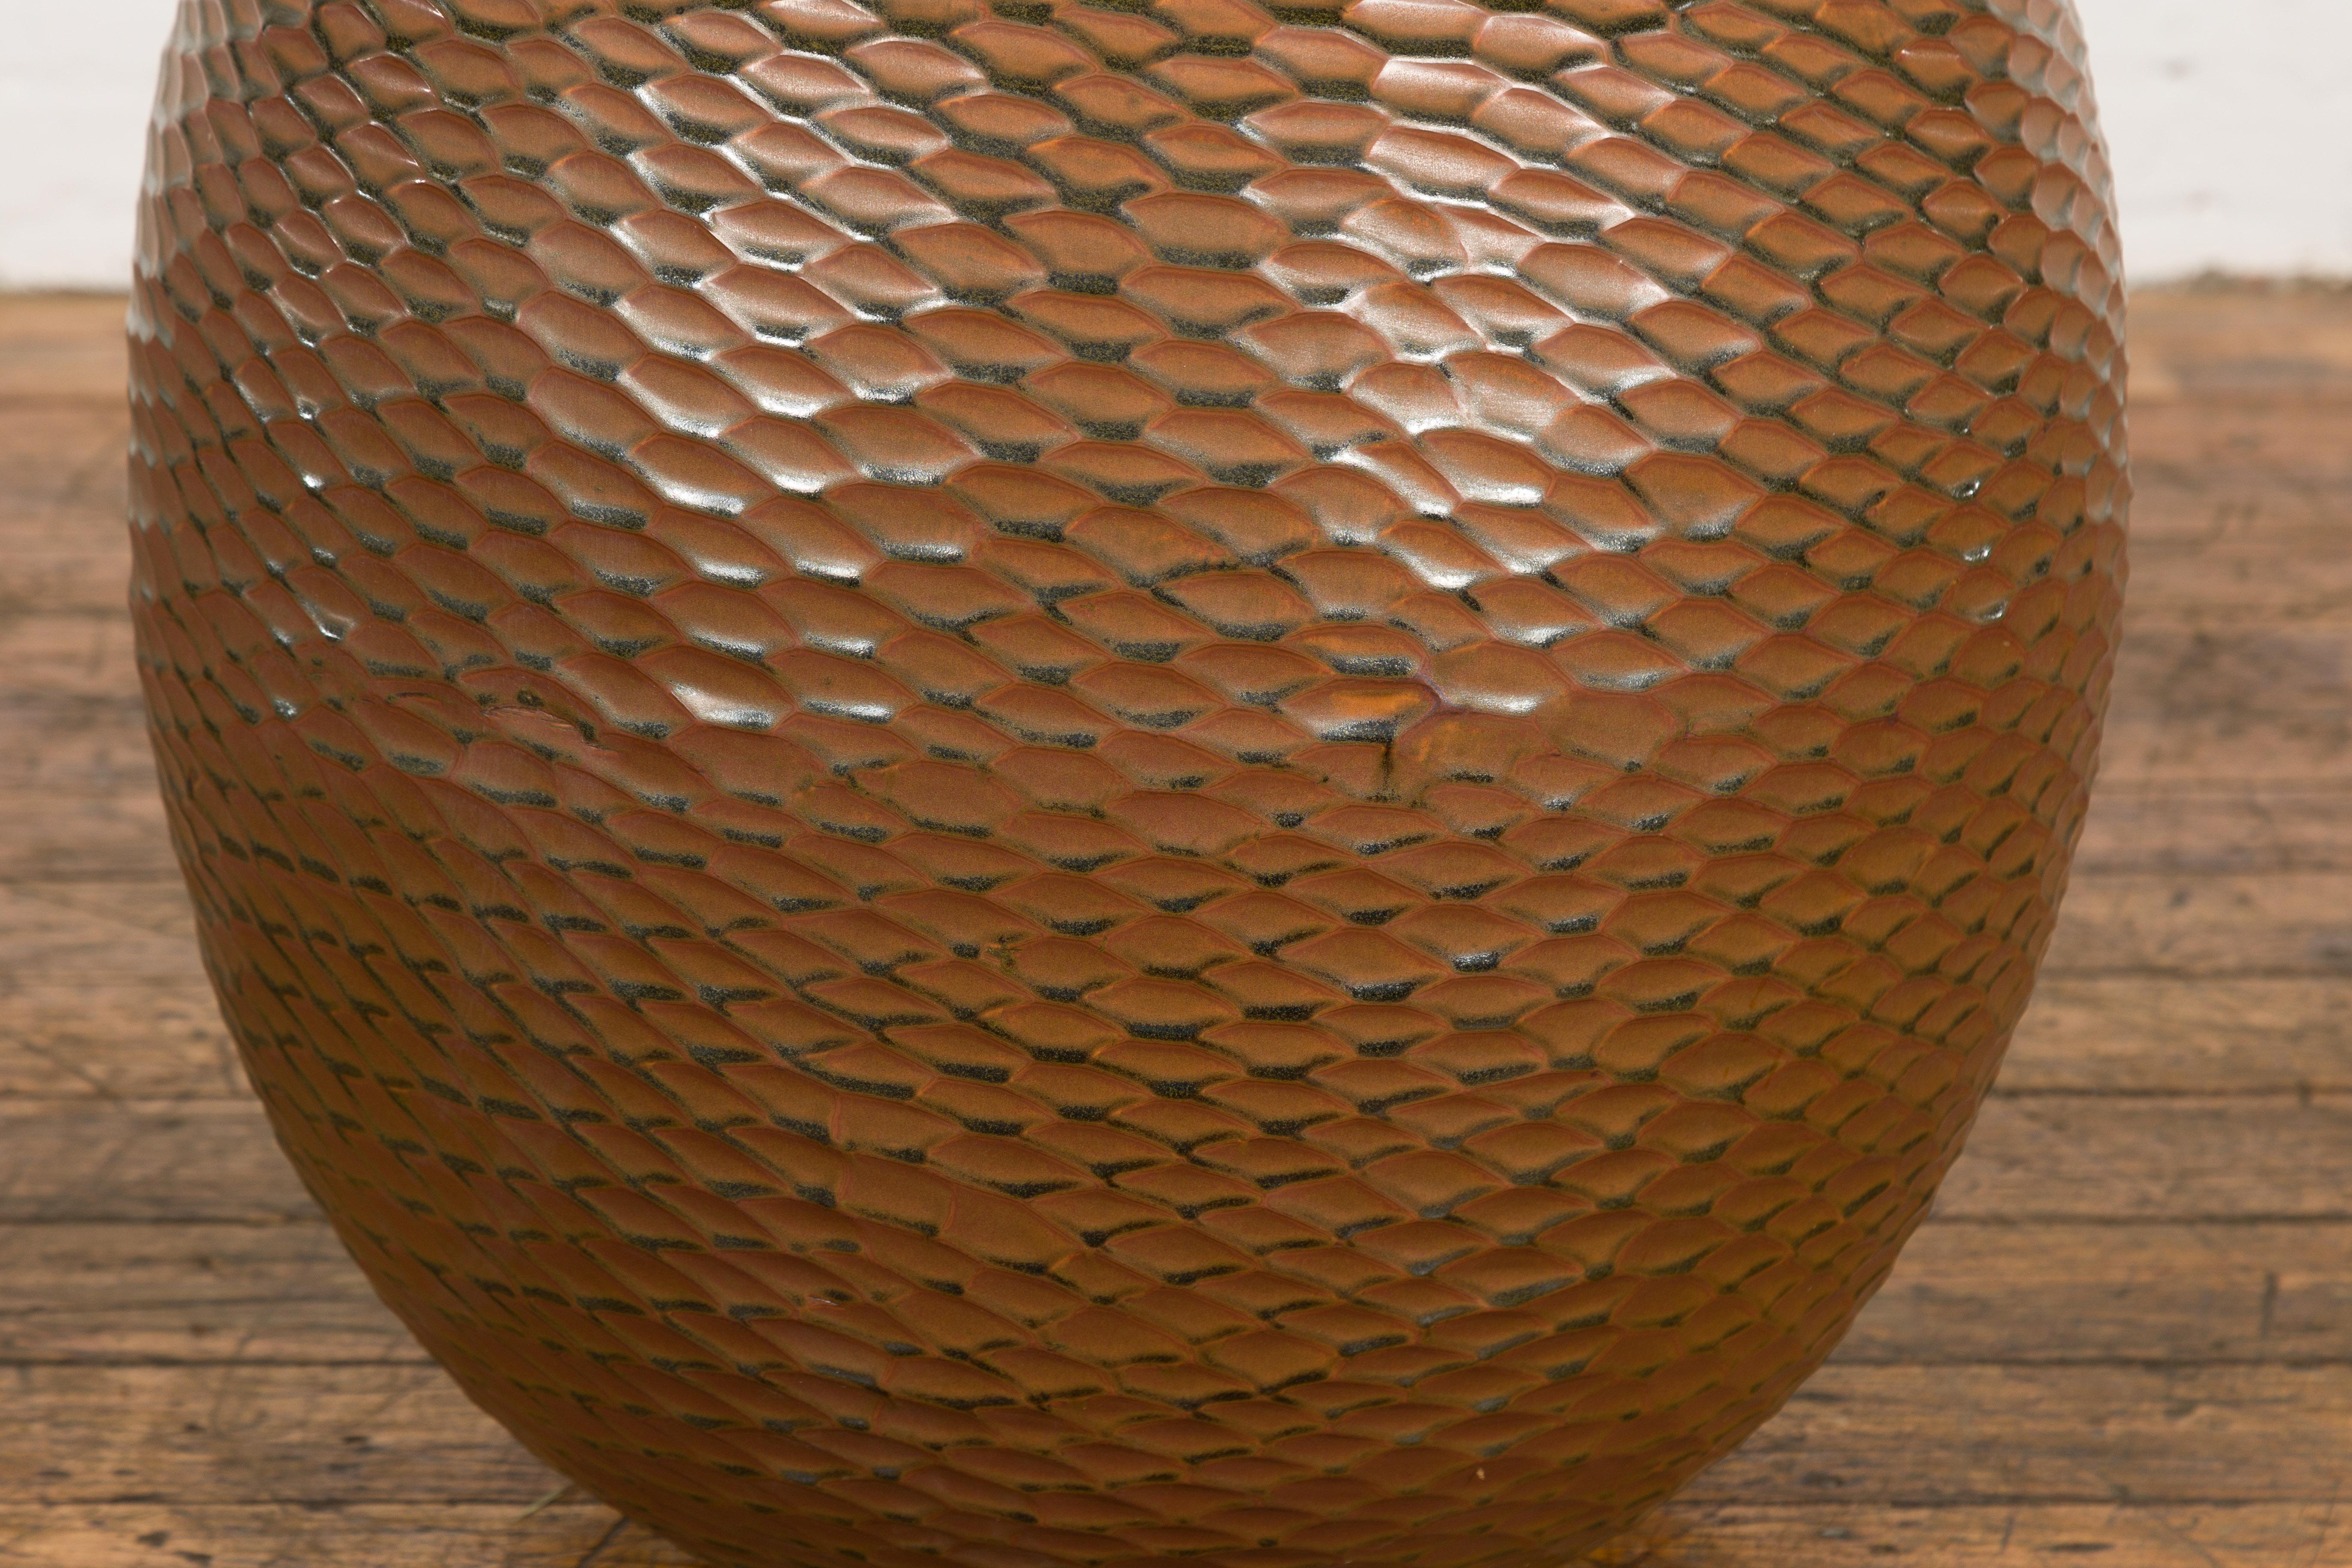 Ceramic Prem Collection Handcrafted Brown Vase with Textured Honeycomb Style Motifs For Sale